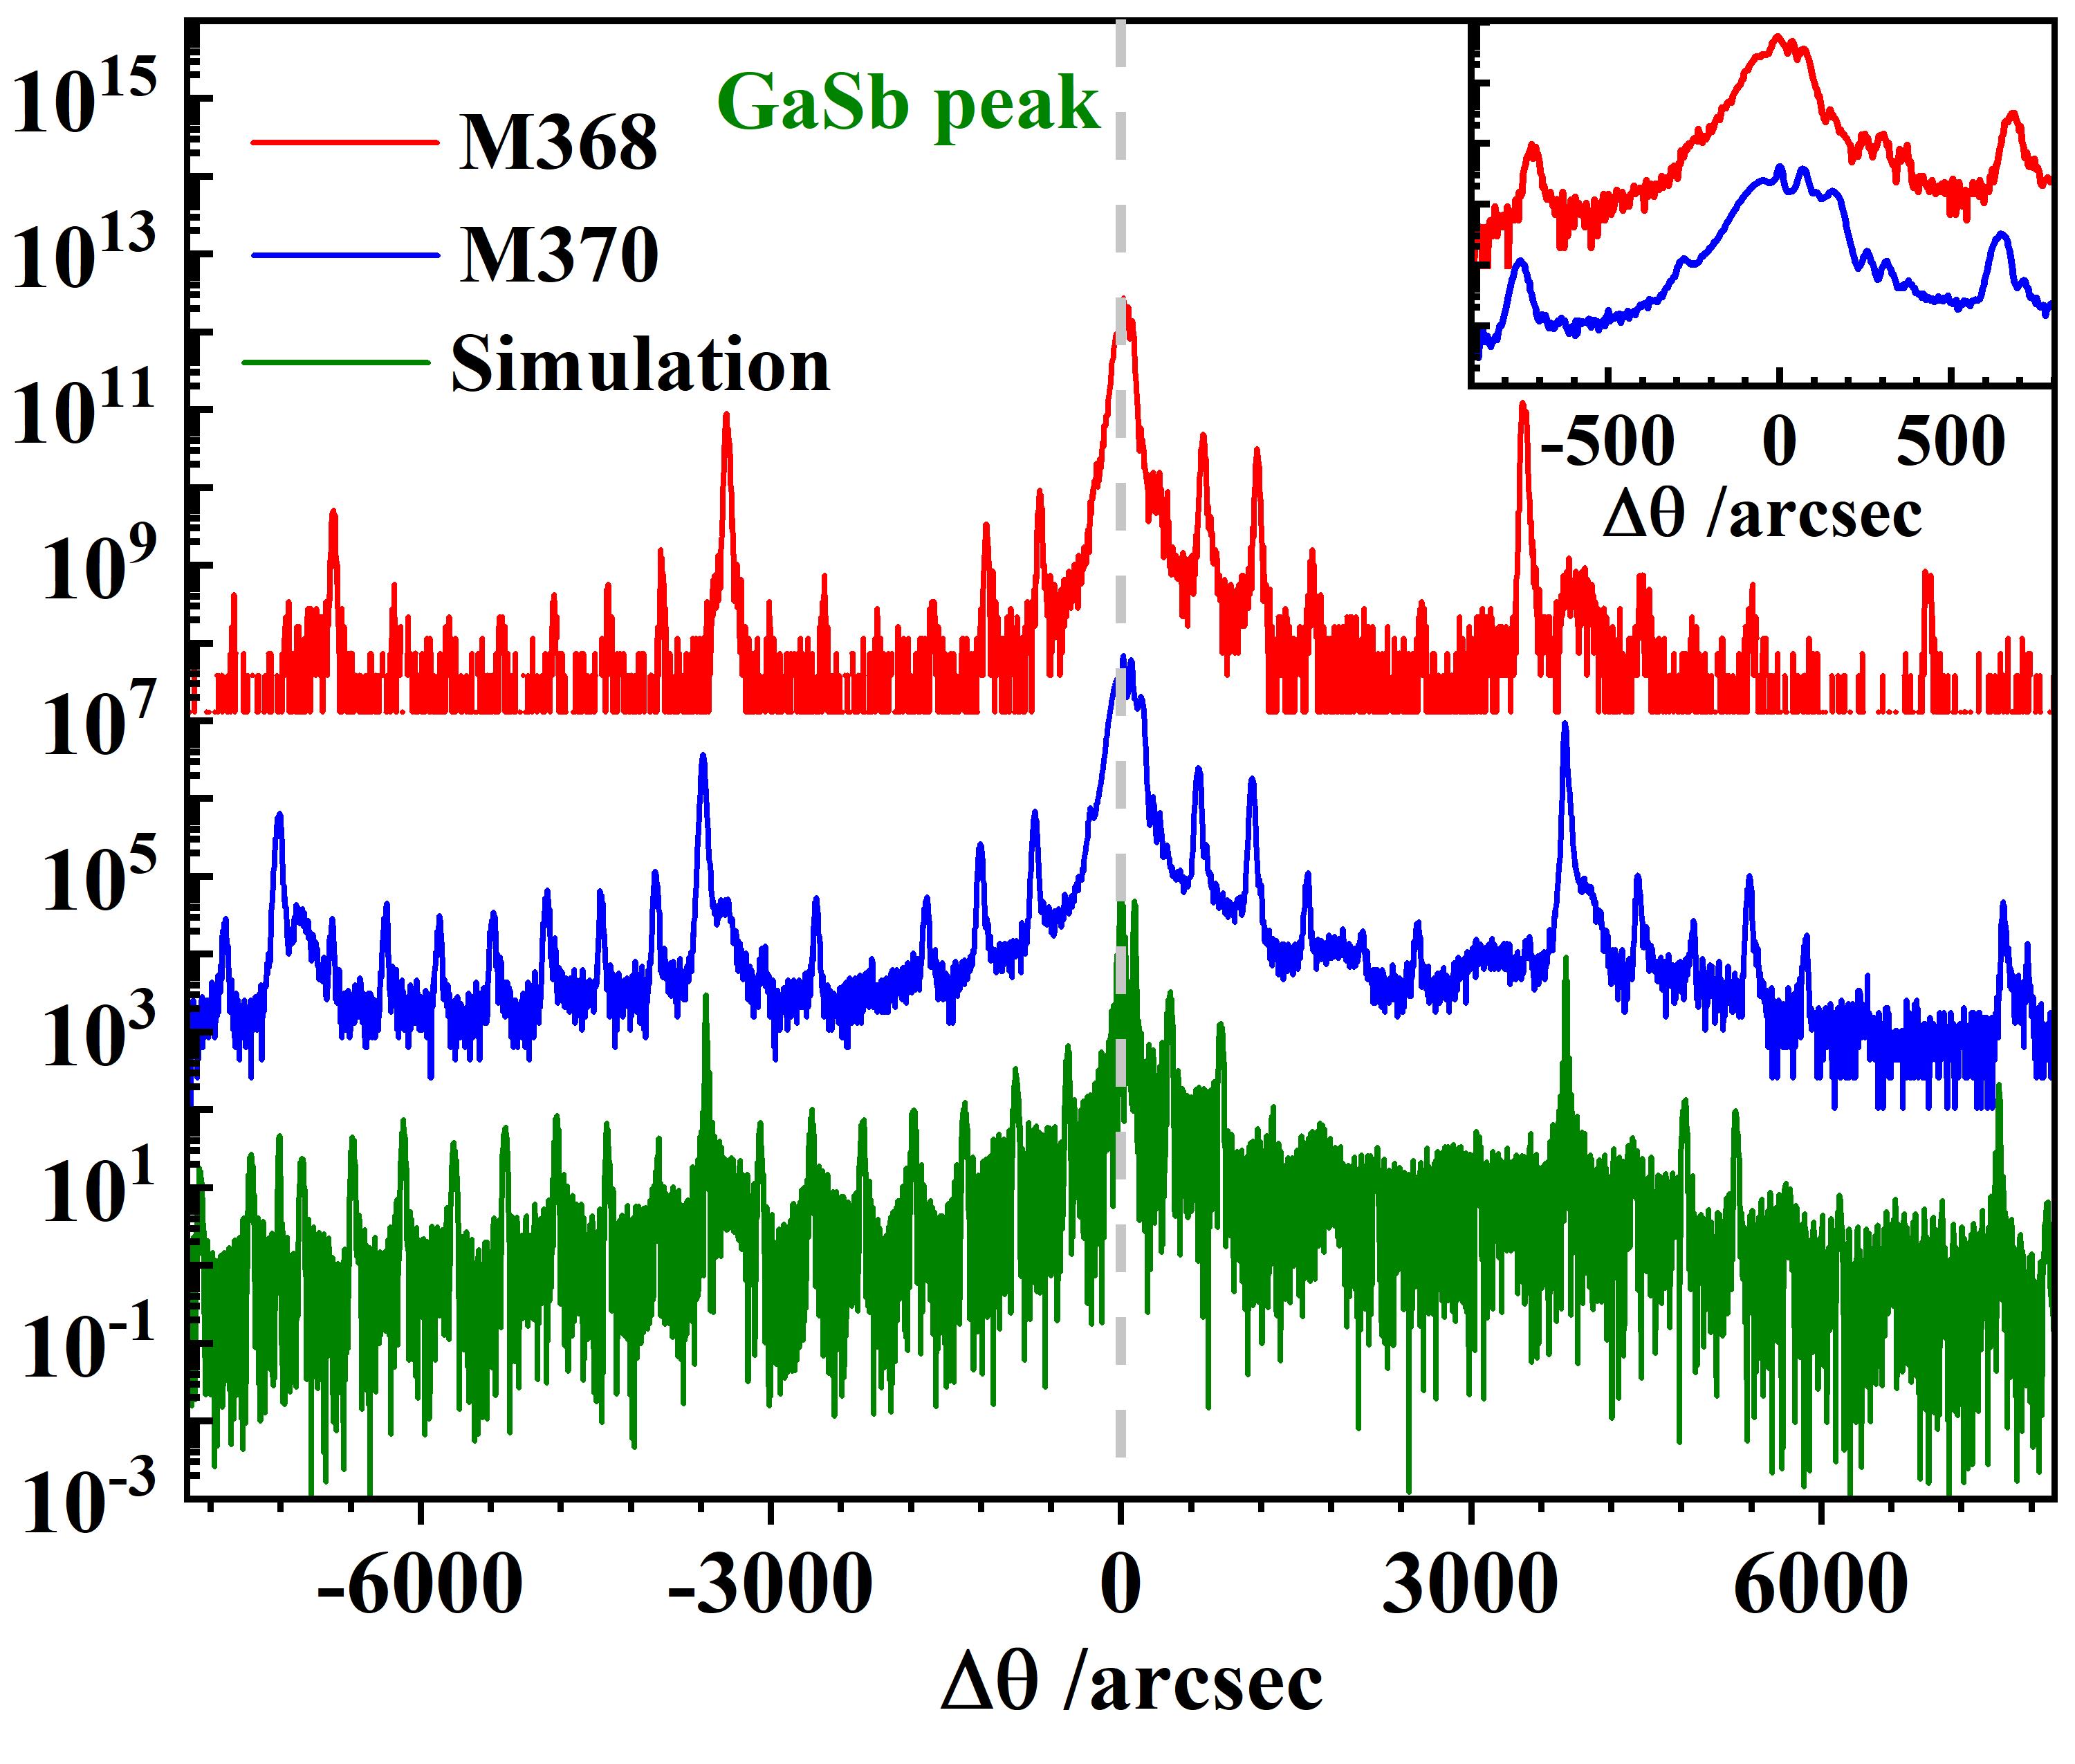 X-ray diffraction data for wafers M368 (top) and M370 (middle) and a corresponding simulation (bottom) of an ω-2θ scan around the (004) reflection for the GaSb substrate. The scans are offset for clarity